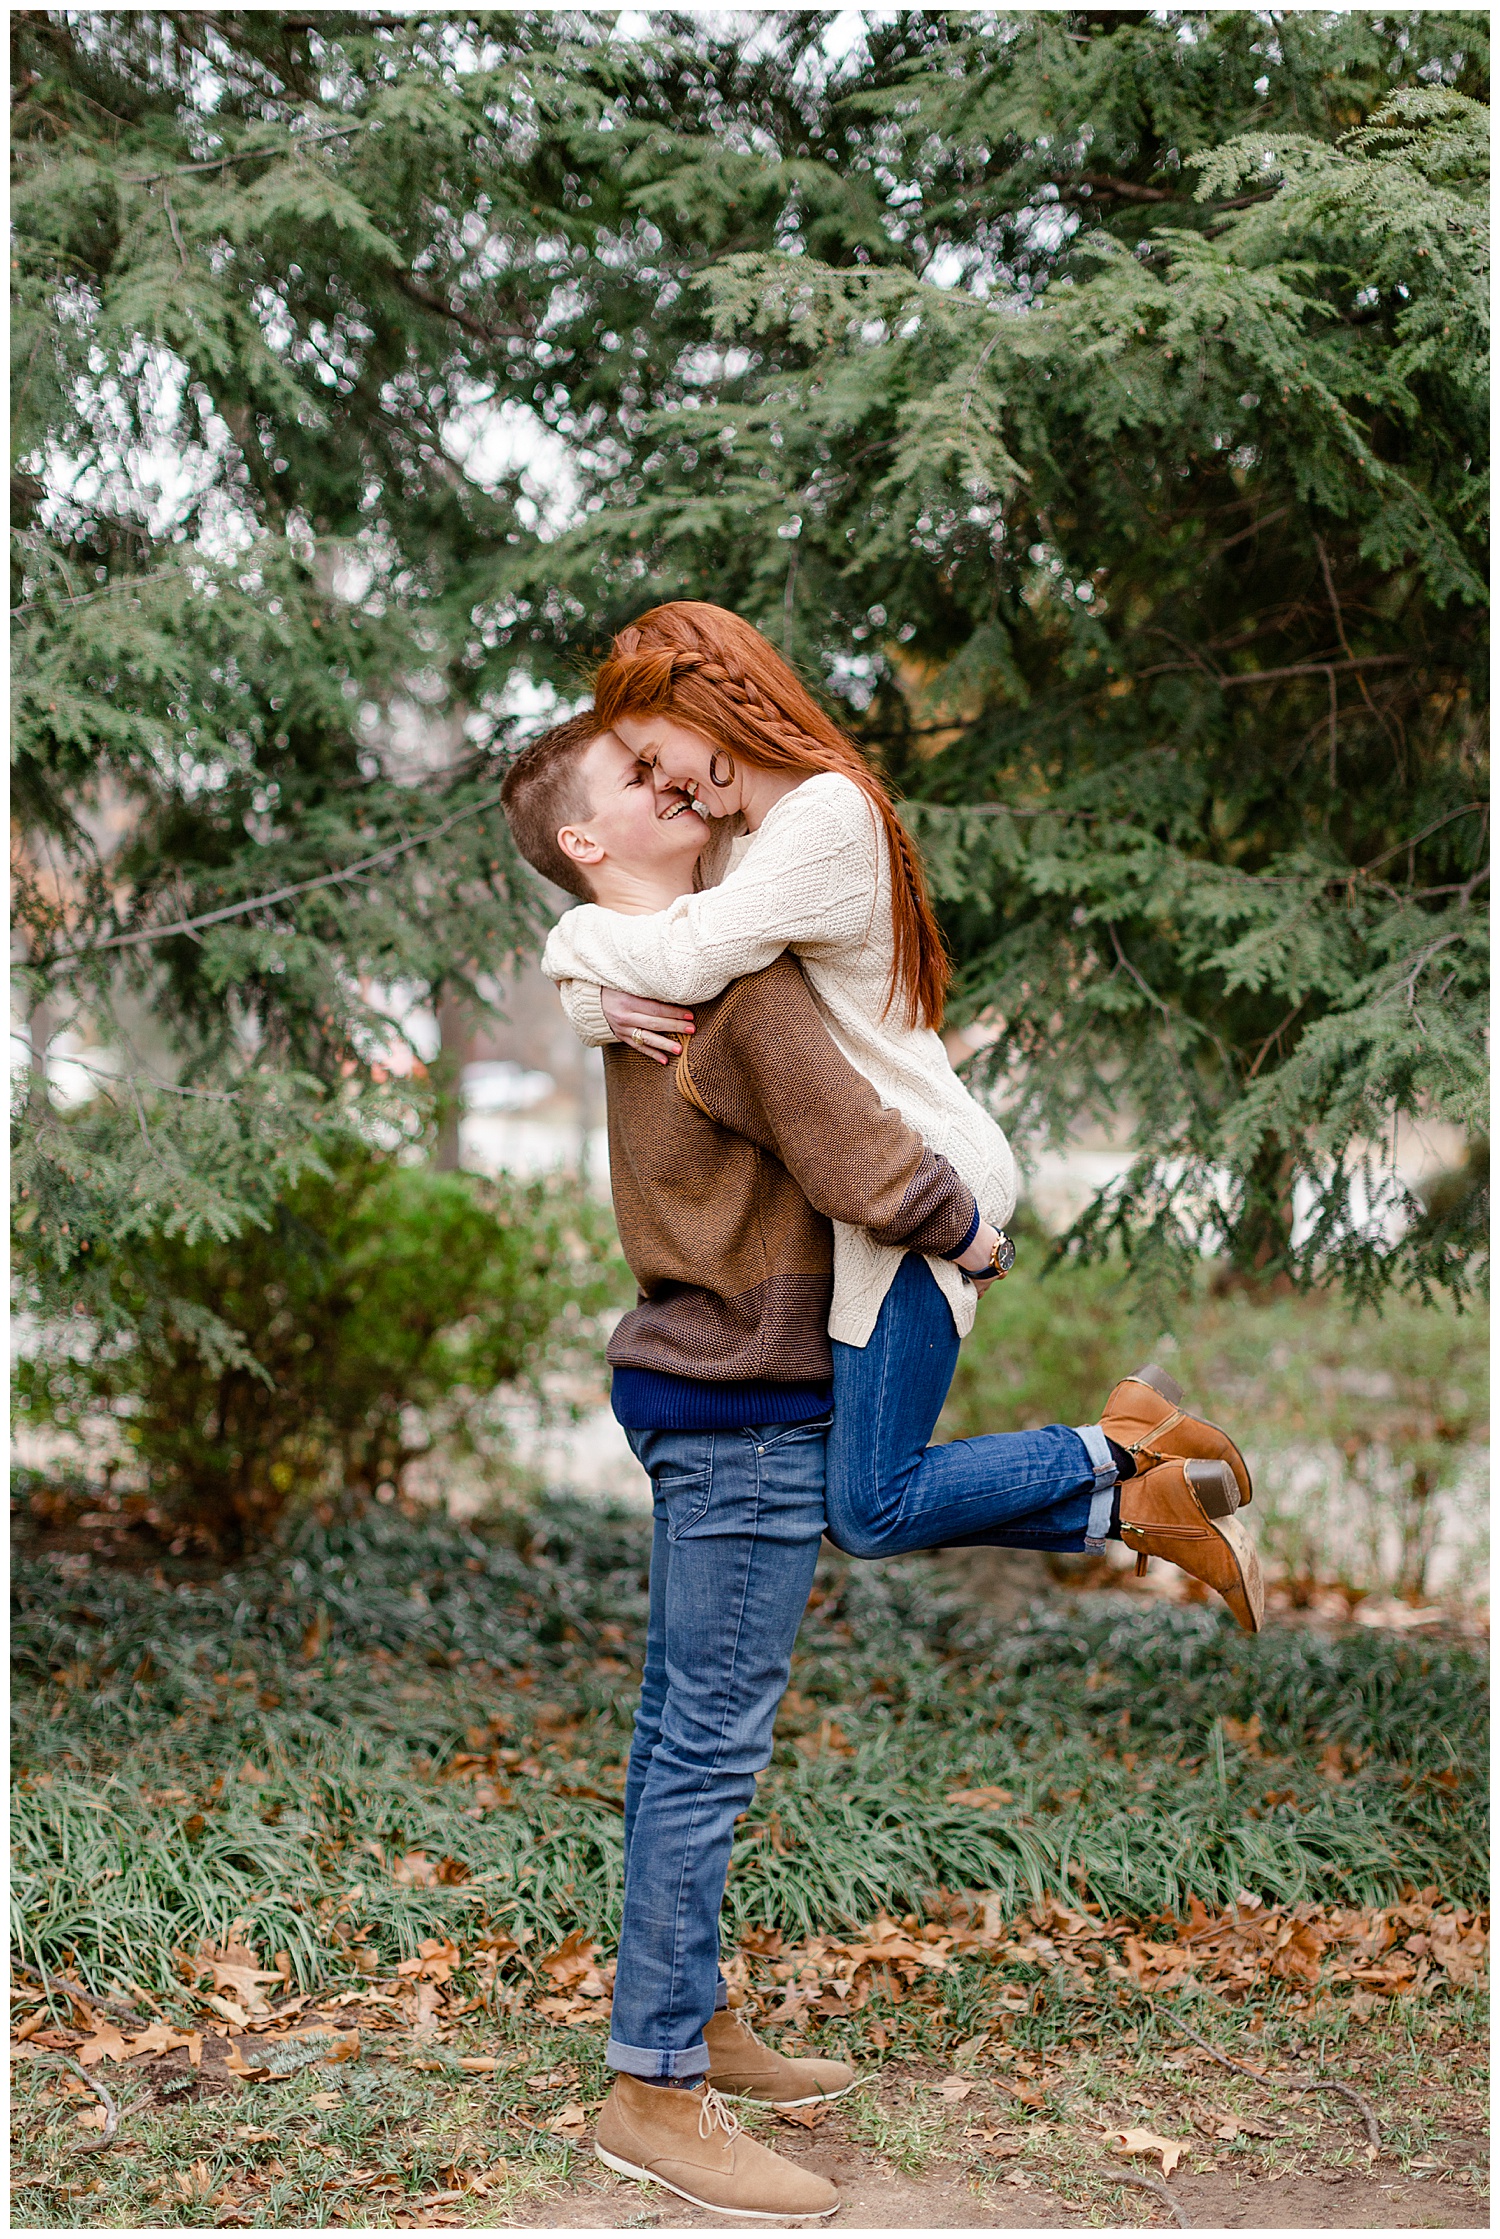 Grant picking Ashley up to kiss her during their Spring engagement session in the evergreen trees.